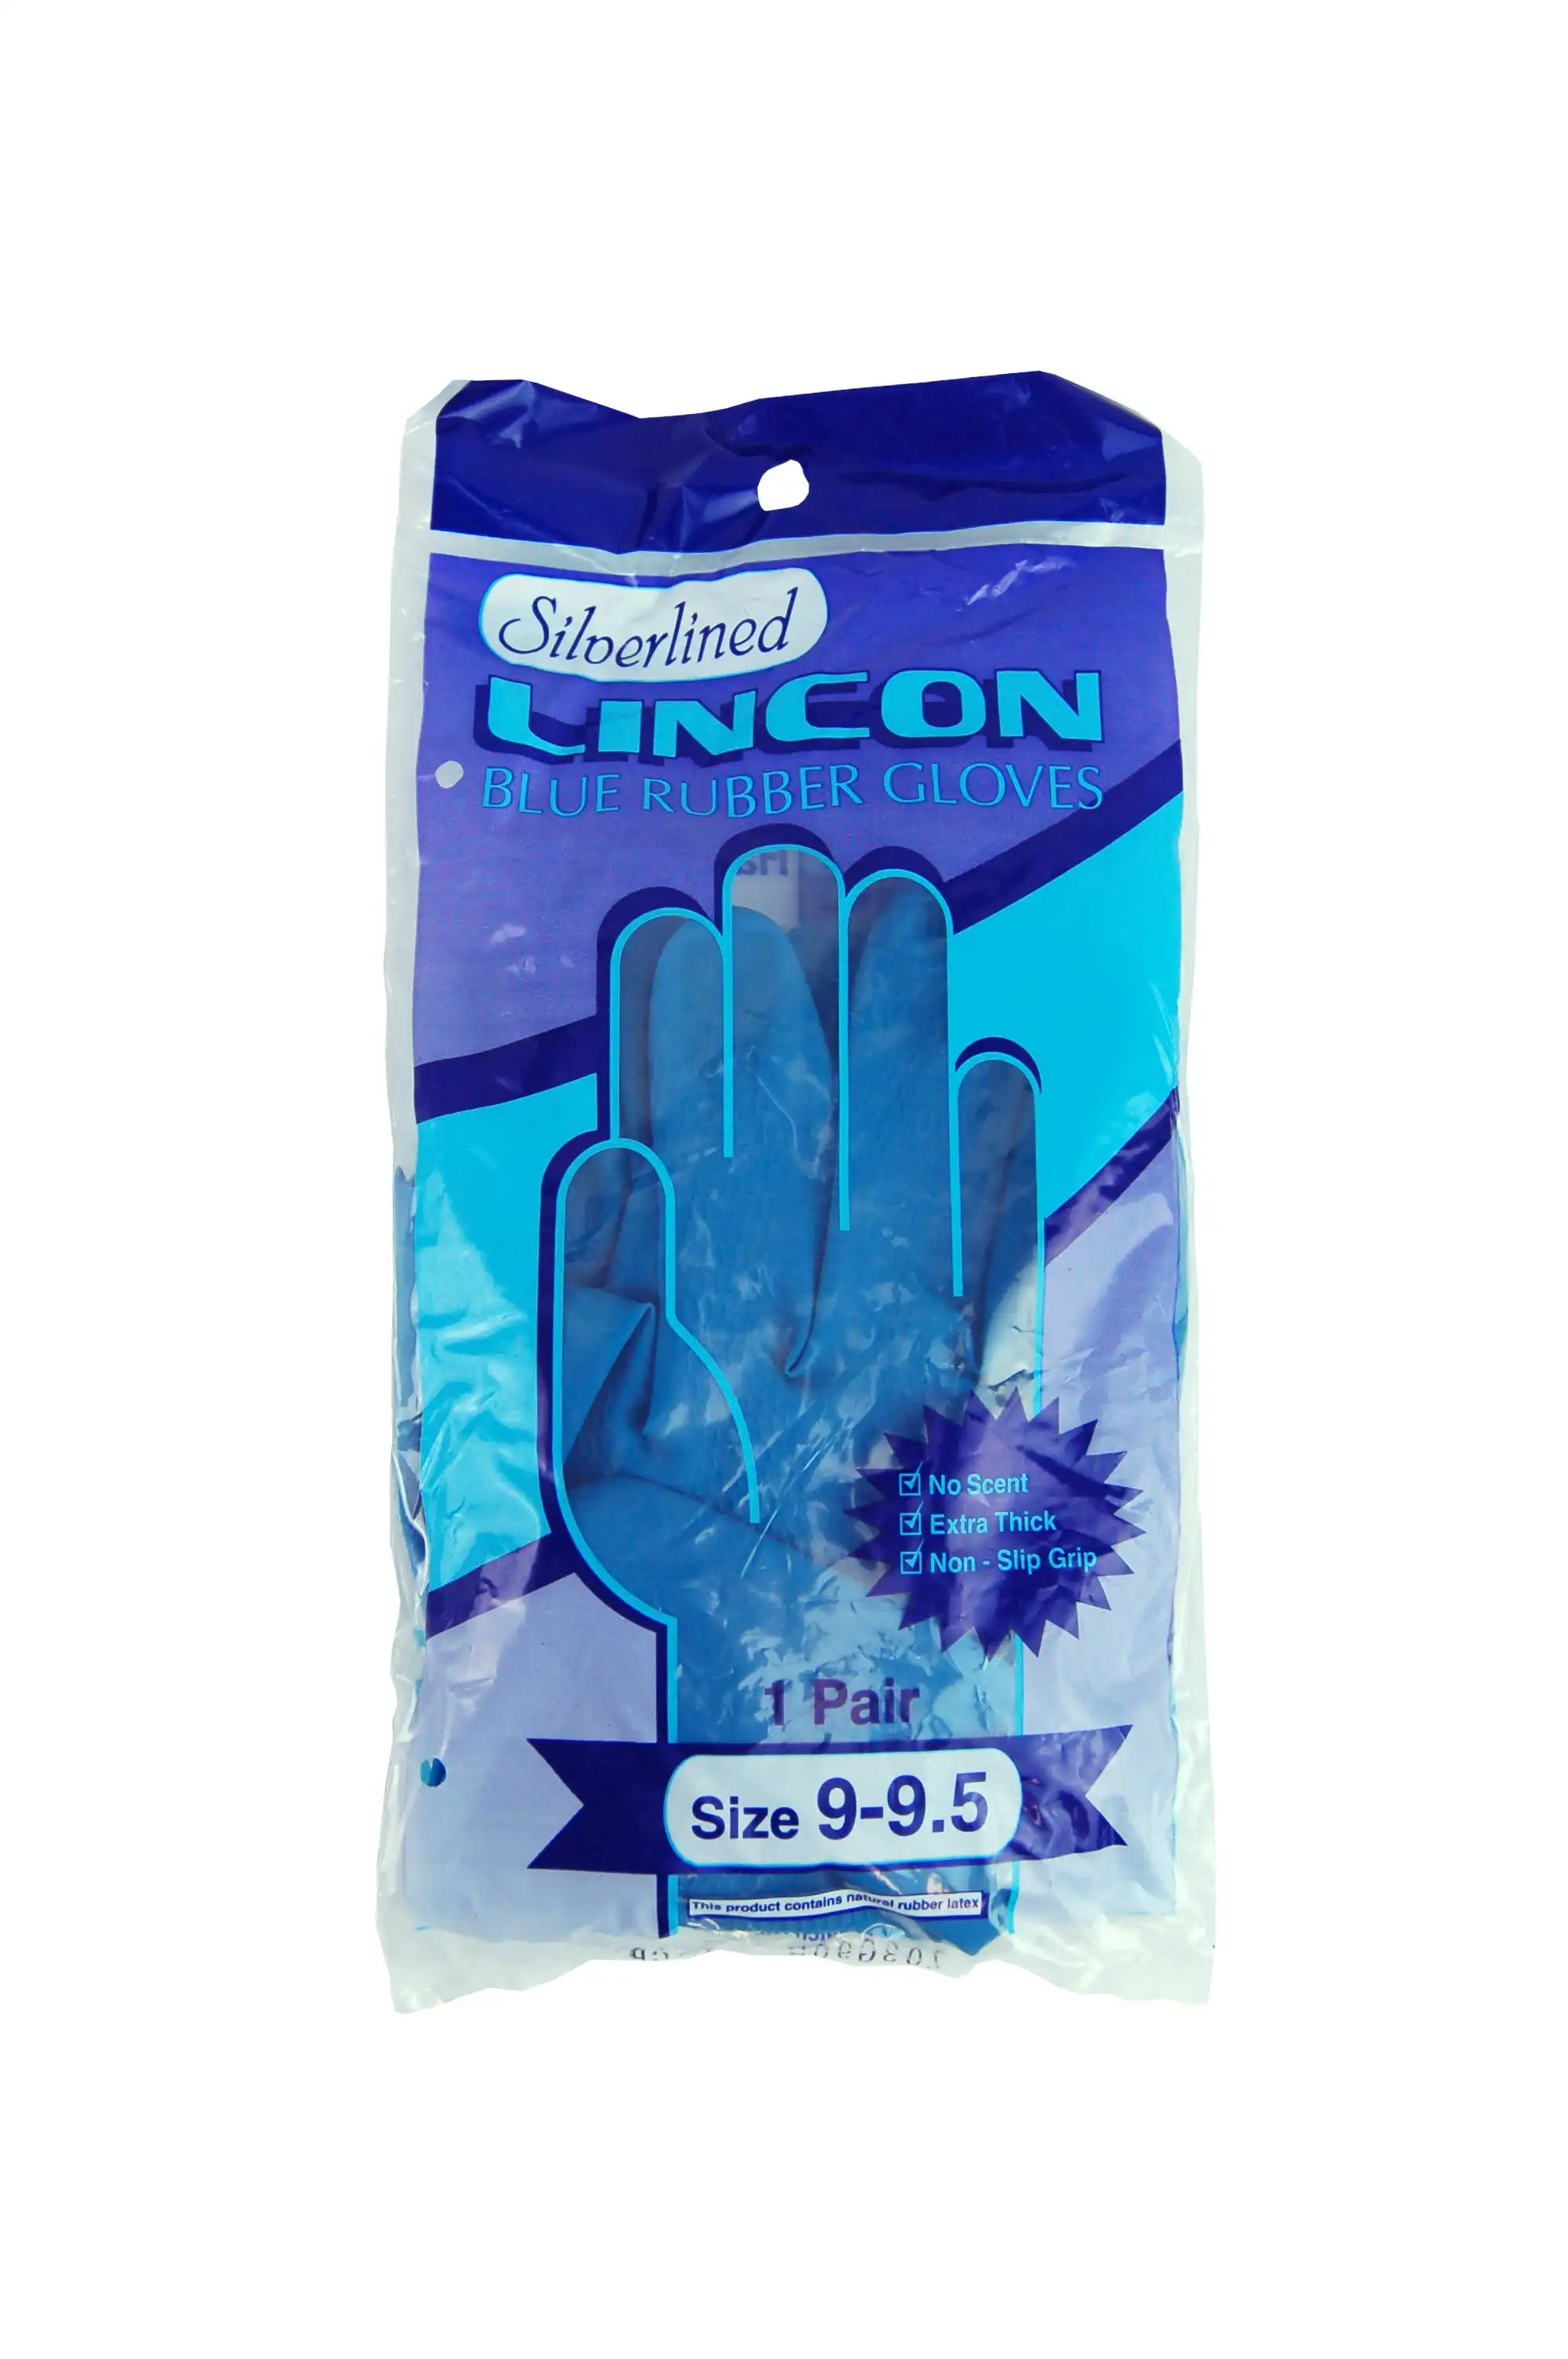 Lincon Silverlined Natural Rubber Gloves with Silver Lining Biodegradable Size 9-9.5 Blue Unscented Pair